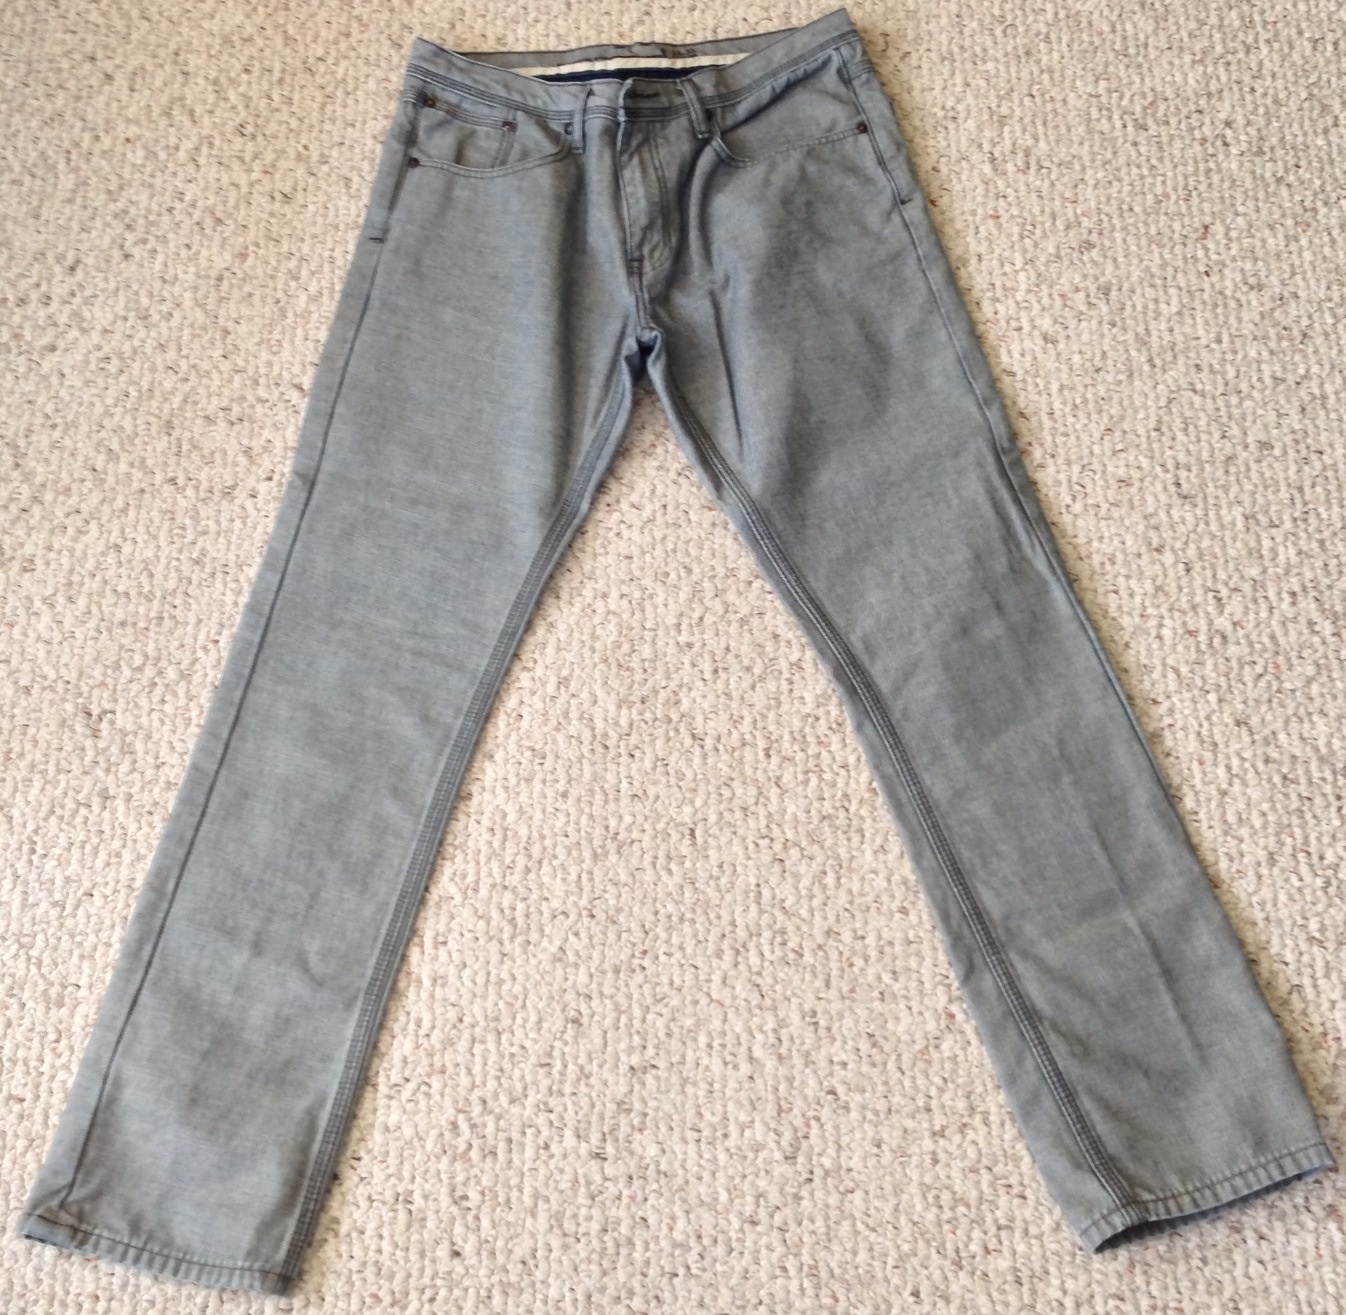 Forever XXI Grey Jeans in Fashion_Forward's Garage Sale Patterson, NY